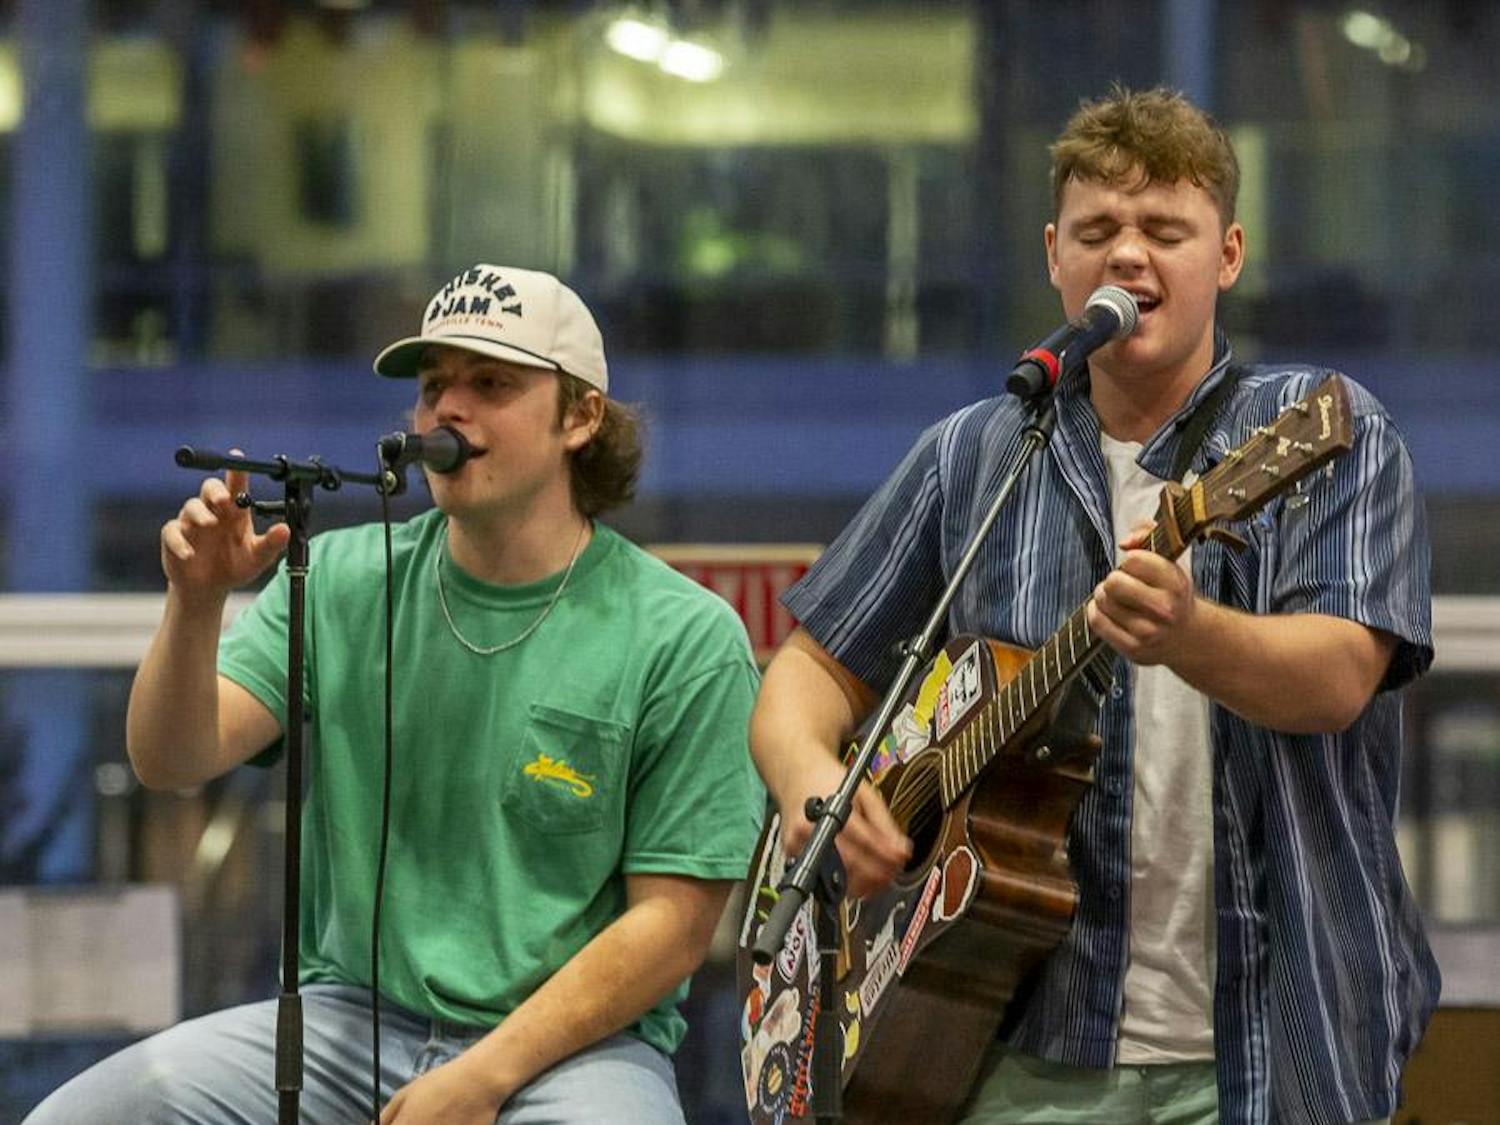 Vince Mason (left) and Will Cullen (right) perform a duo at the end of the "Country at Koger" event on Aug. 27, 2023. The free event for students featured performances from country artists Jordana Bryant, Vincent Mason and Will Cullen.